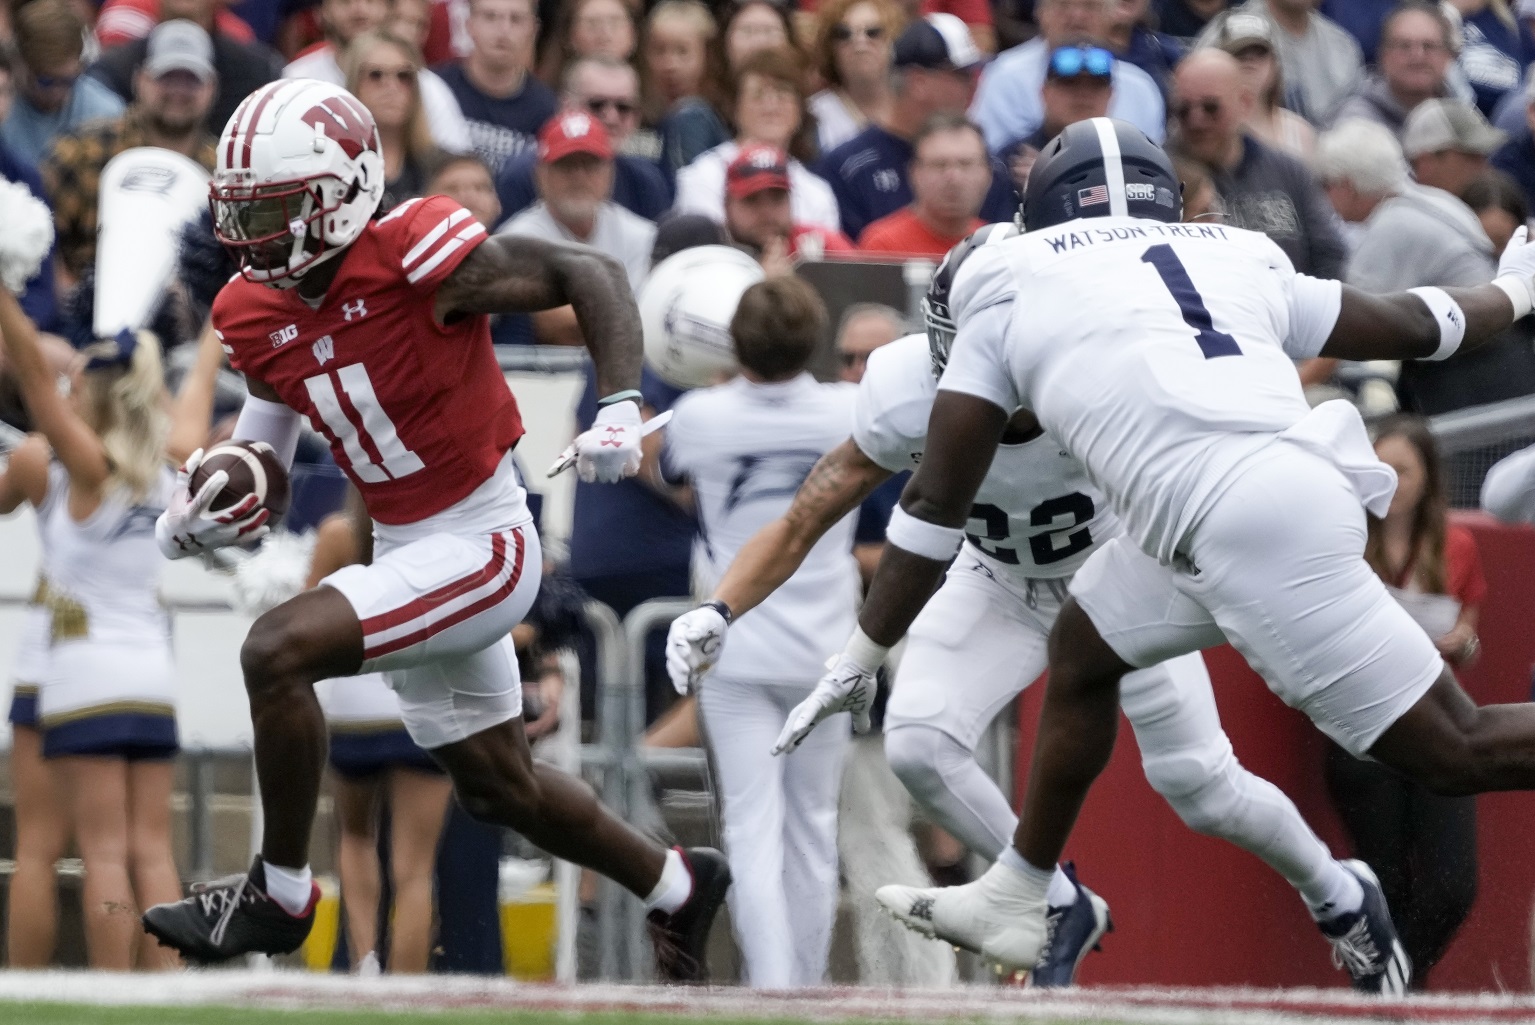 Mordecai, Allen each run for 2 TDs, Badgers force 6 turnovers to beat Georgia Southern